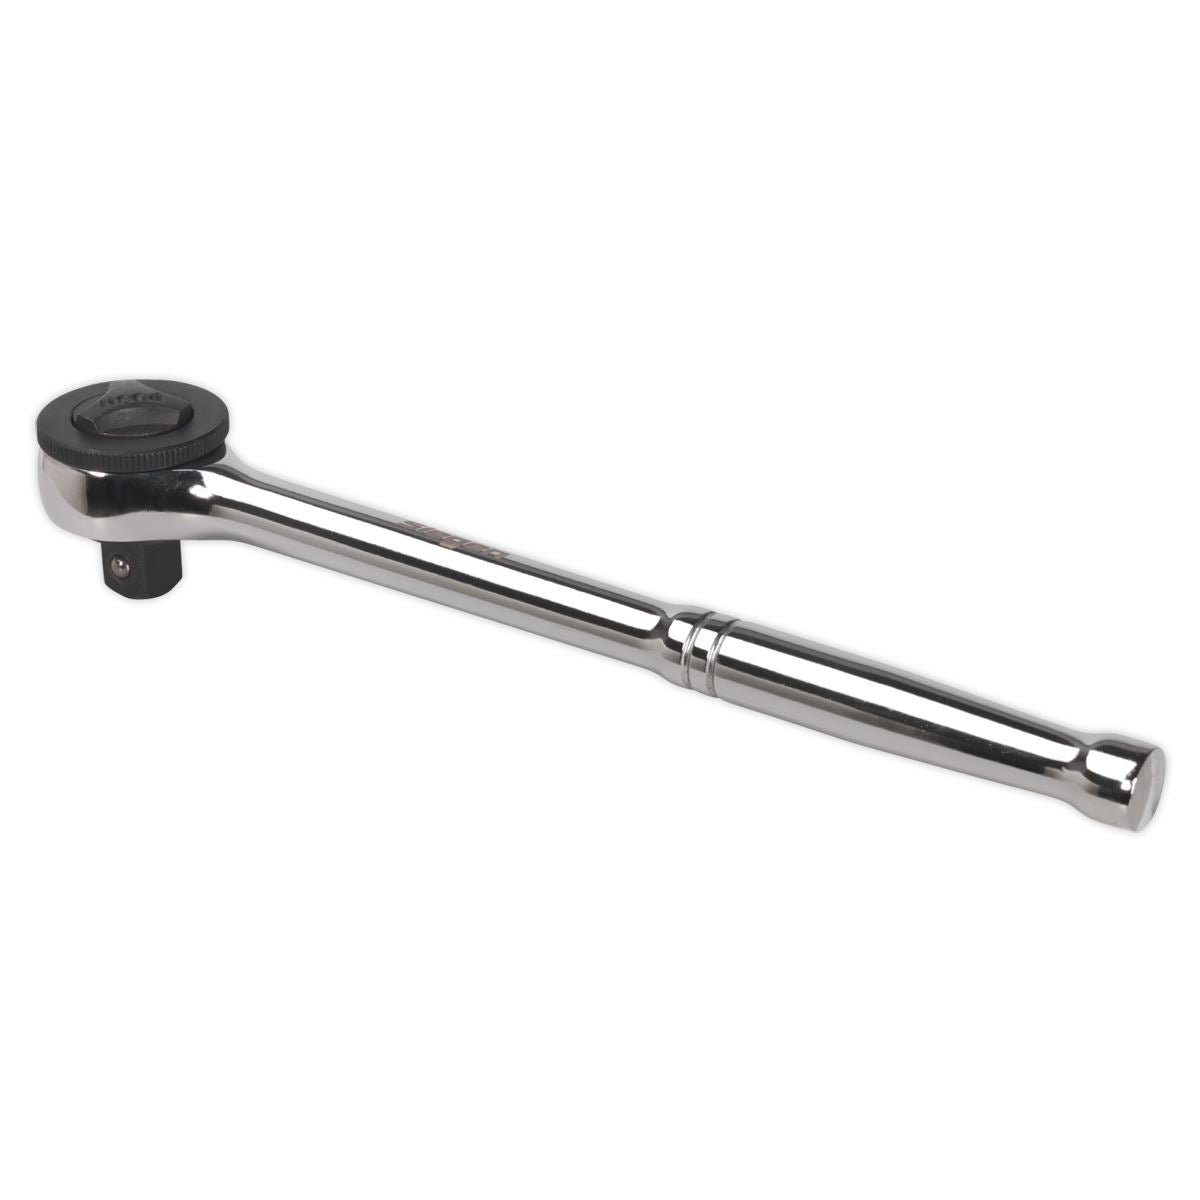 Siegen by Sealey Ratchet Wrench 1/2"Sq Drive